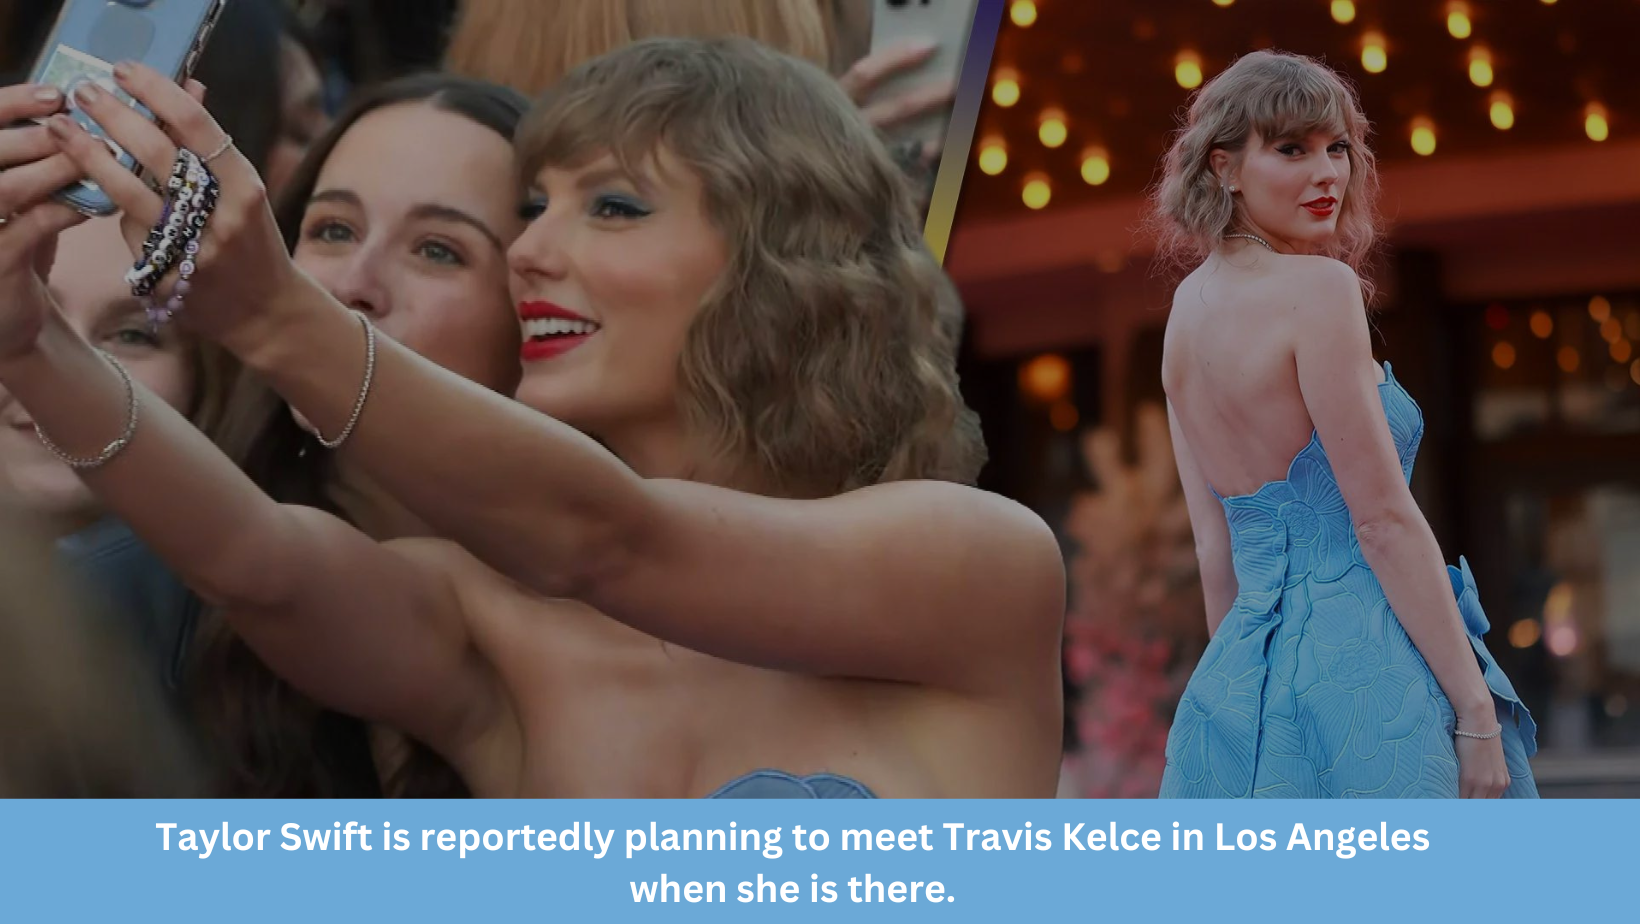 Taylor Swift is reportedly planning to meet Travis Kelce in Los Angeles when she is there.